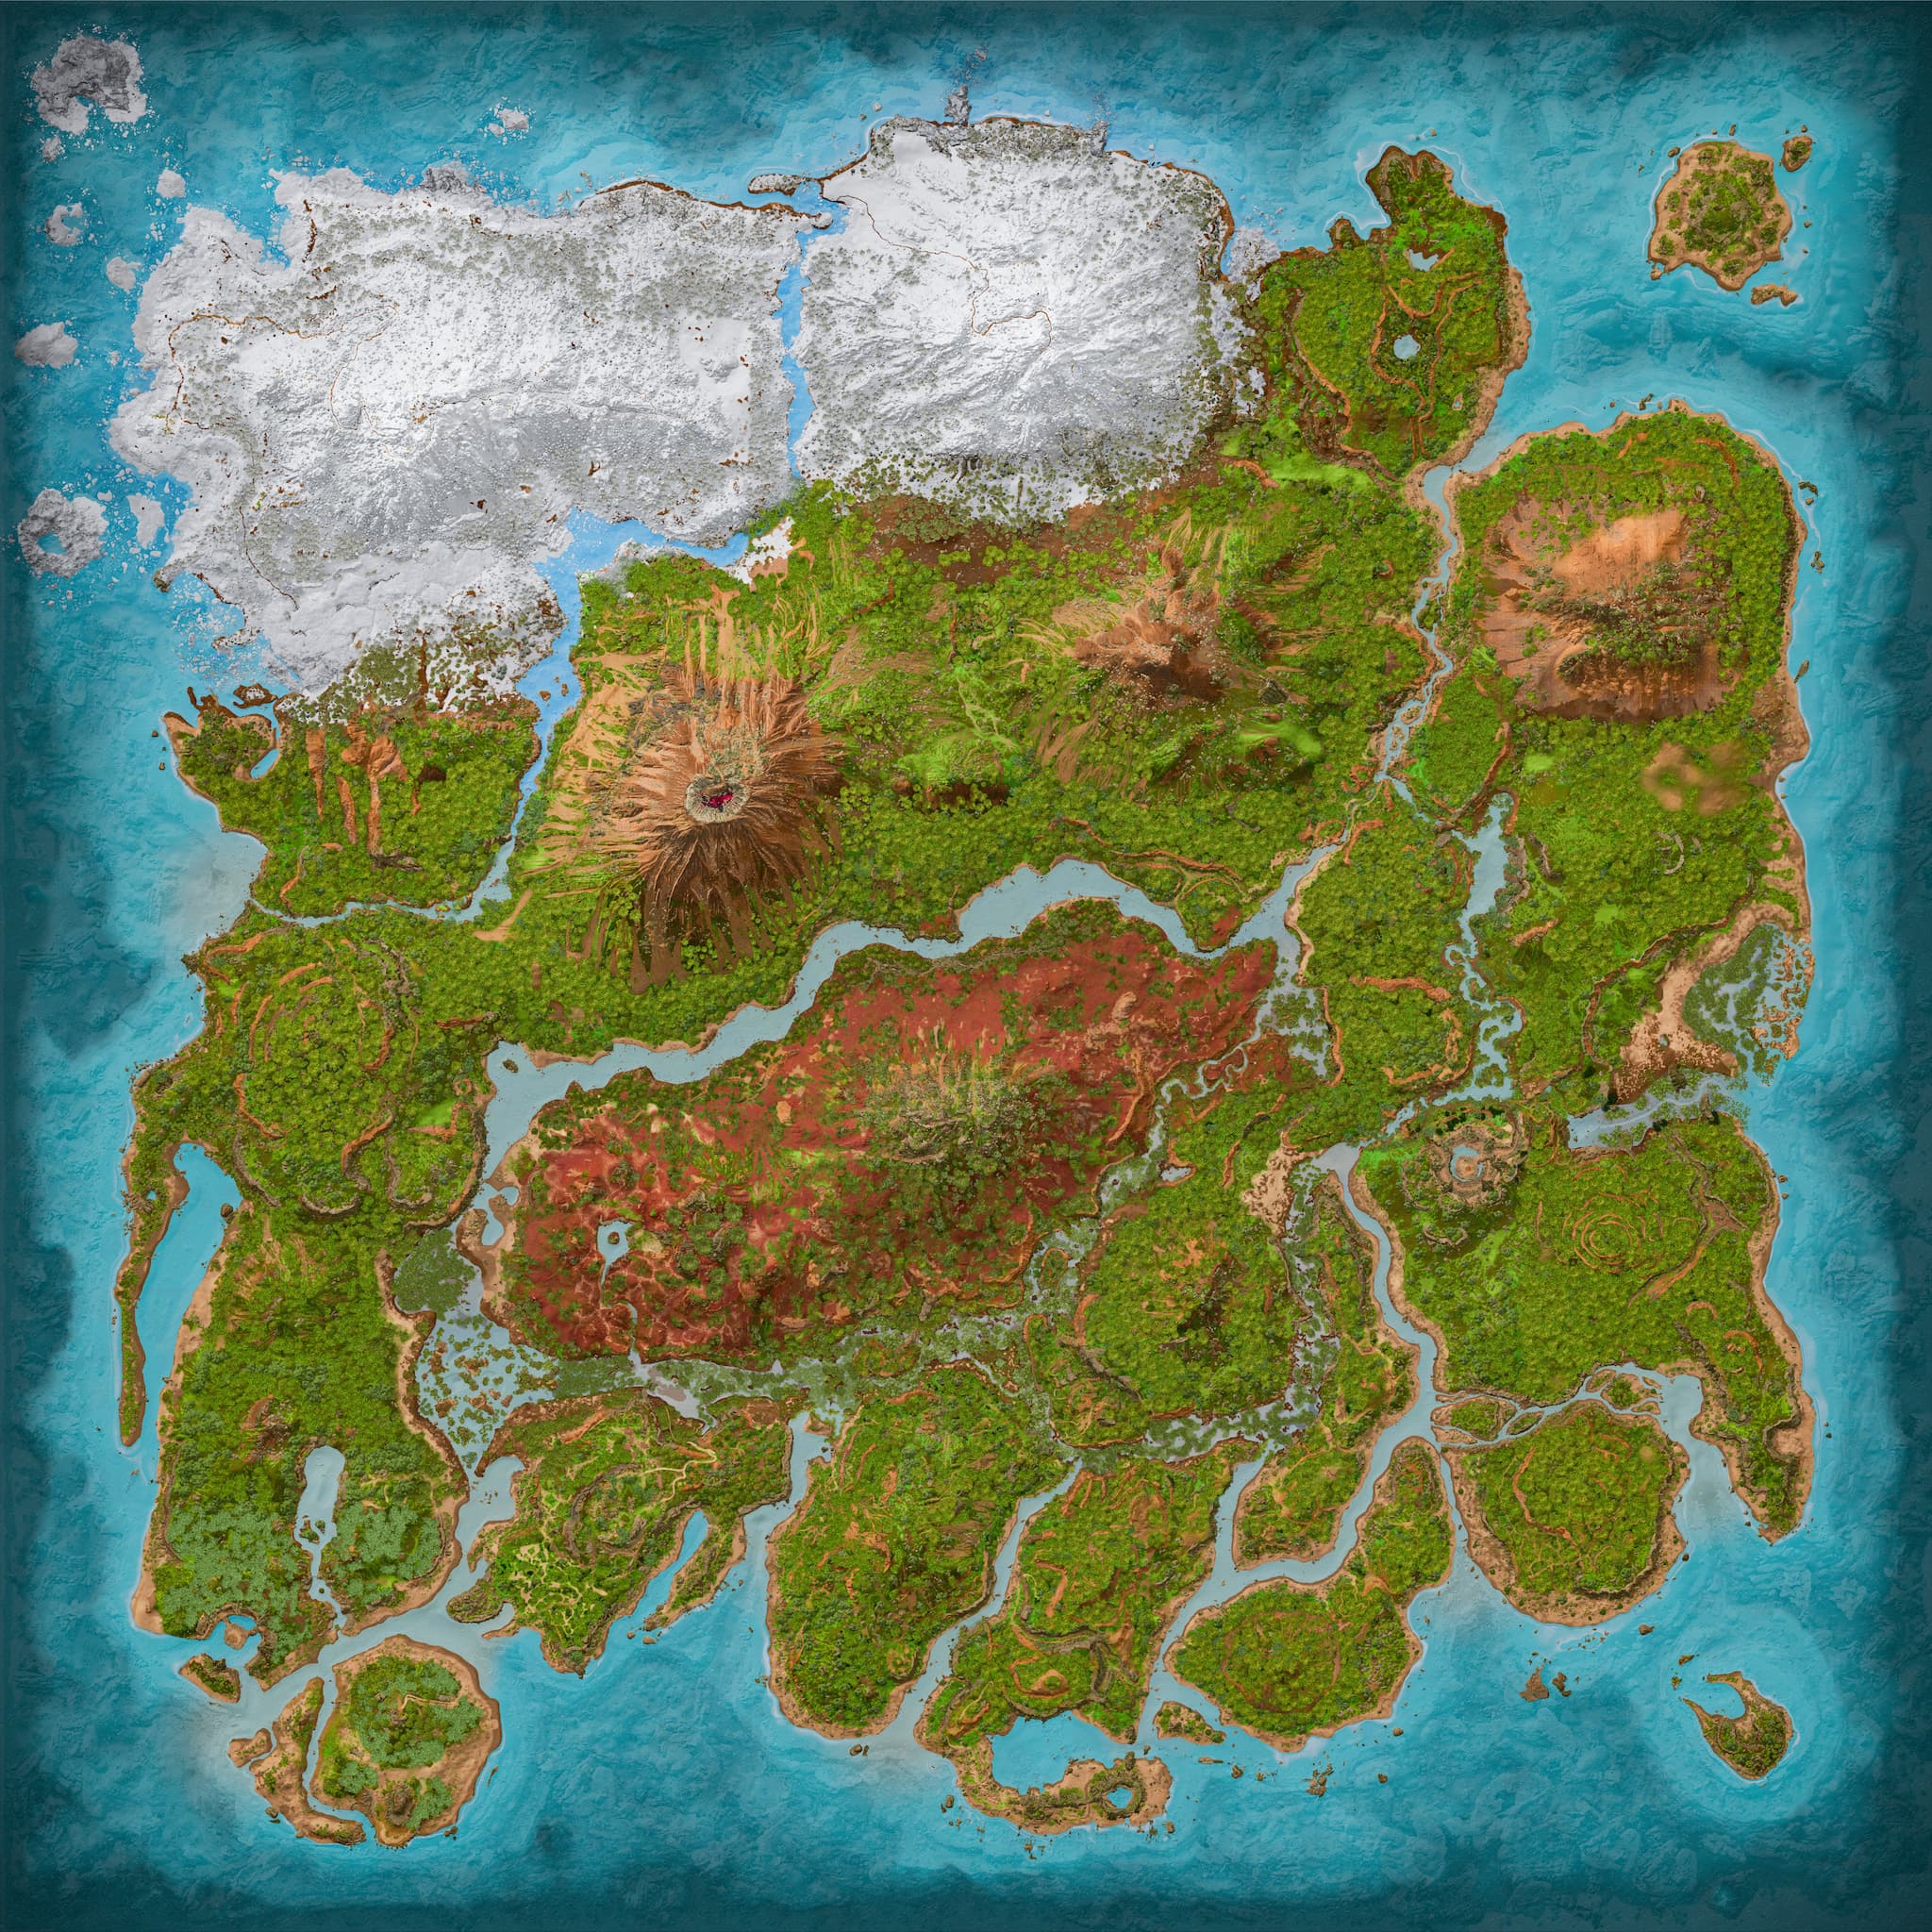 ARK: Survival Evolved Lost Island Map Guide: Resource Locations